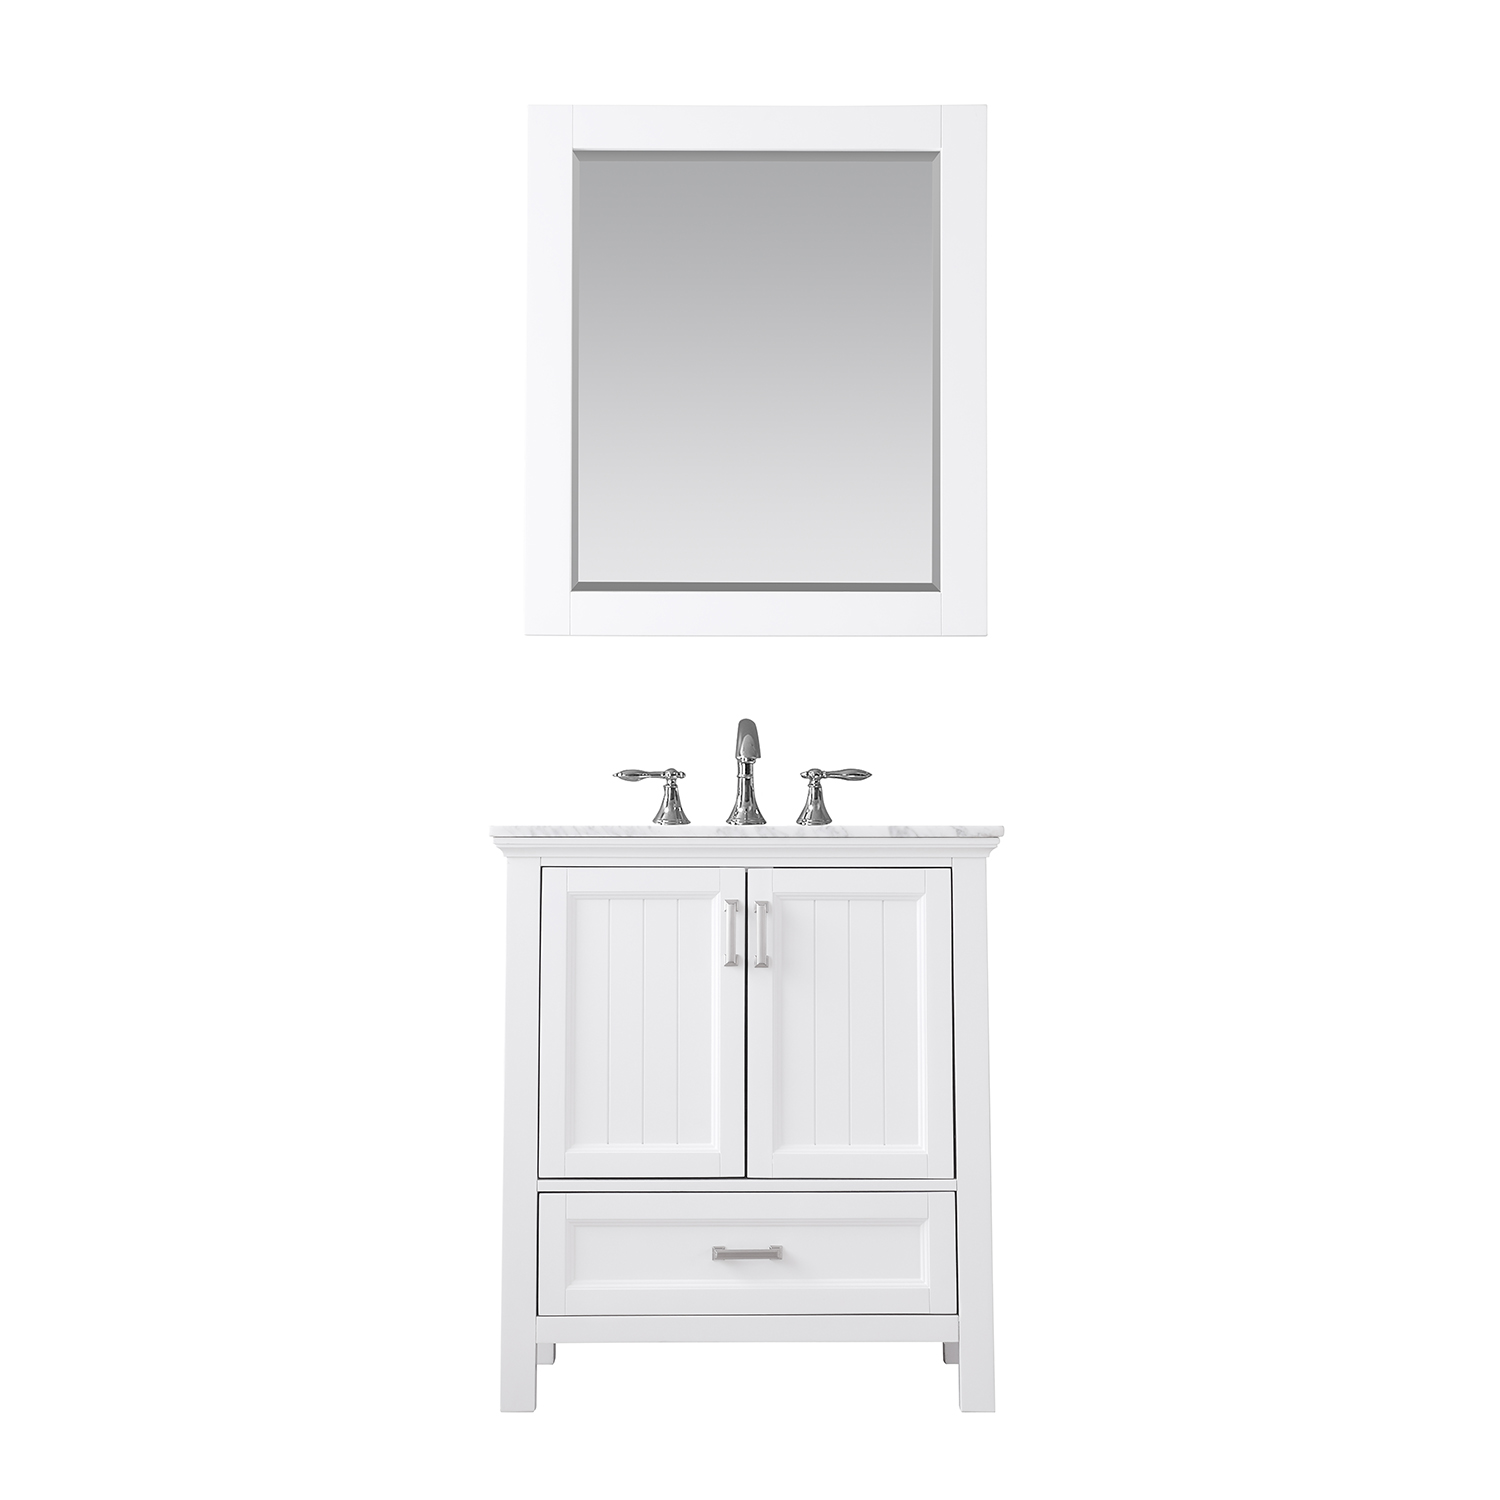 Issac Edwards Collection 30" Single Bathroom Vanity Set in White and Carrara White Marble Countertop without Mirror 